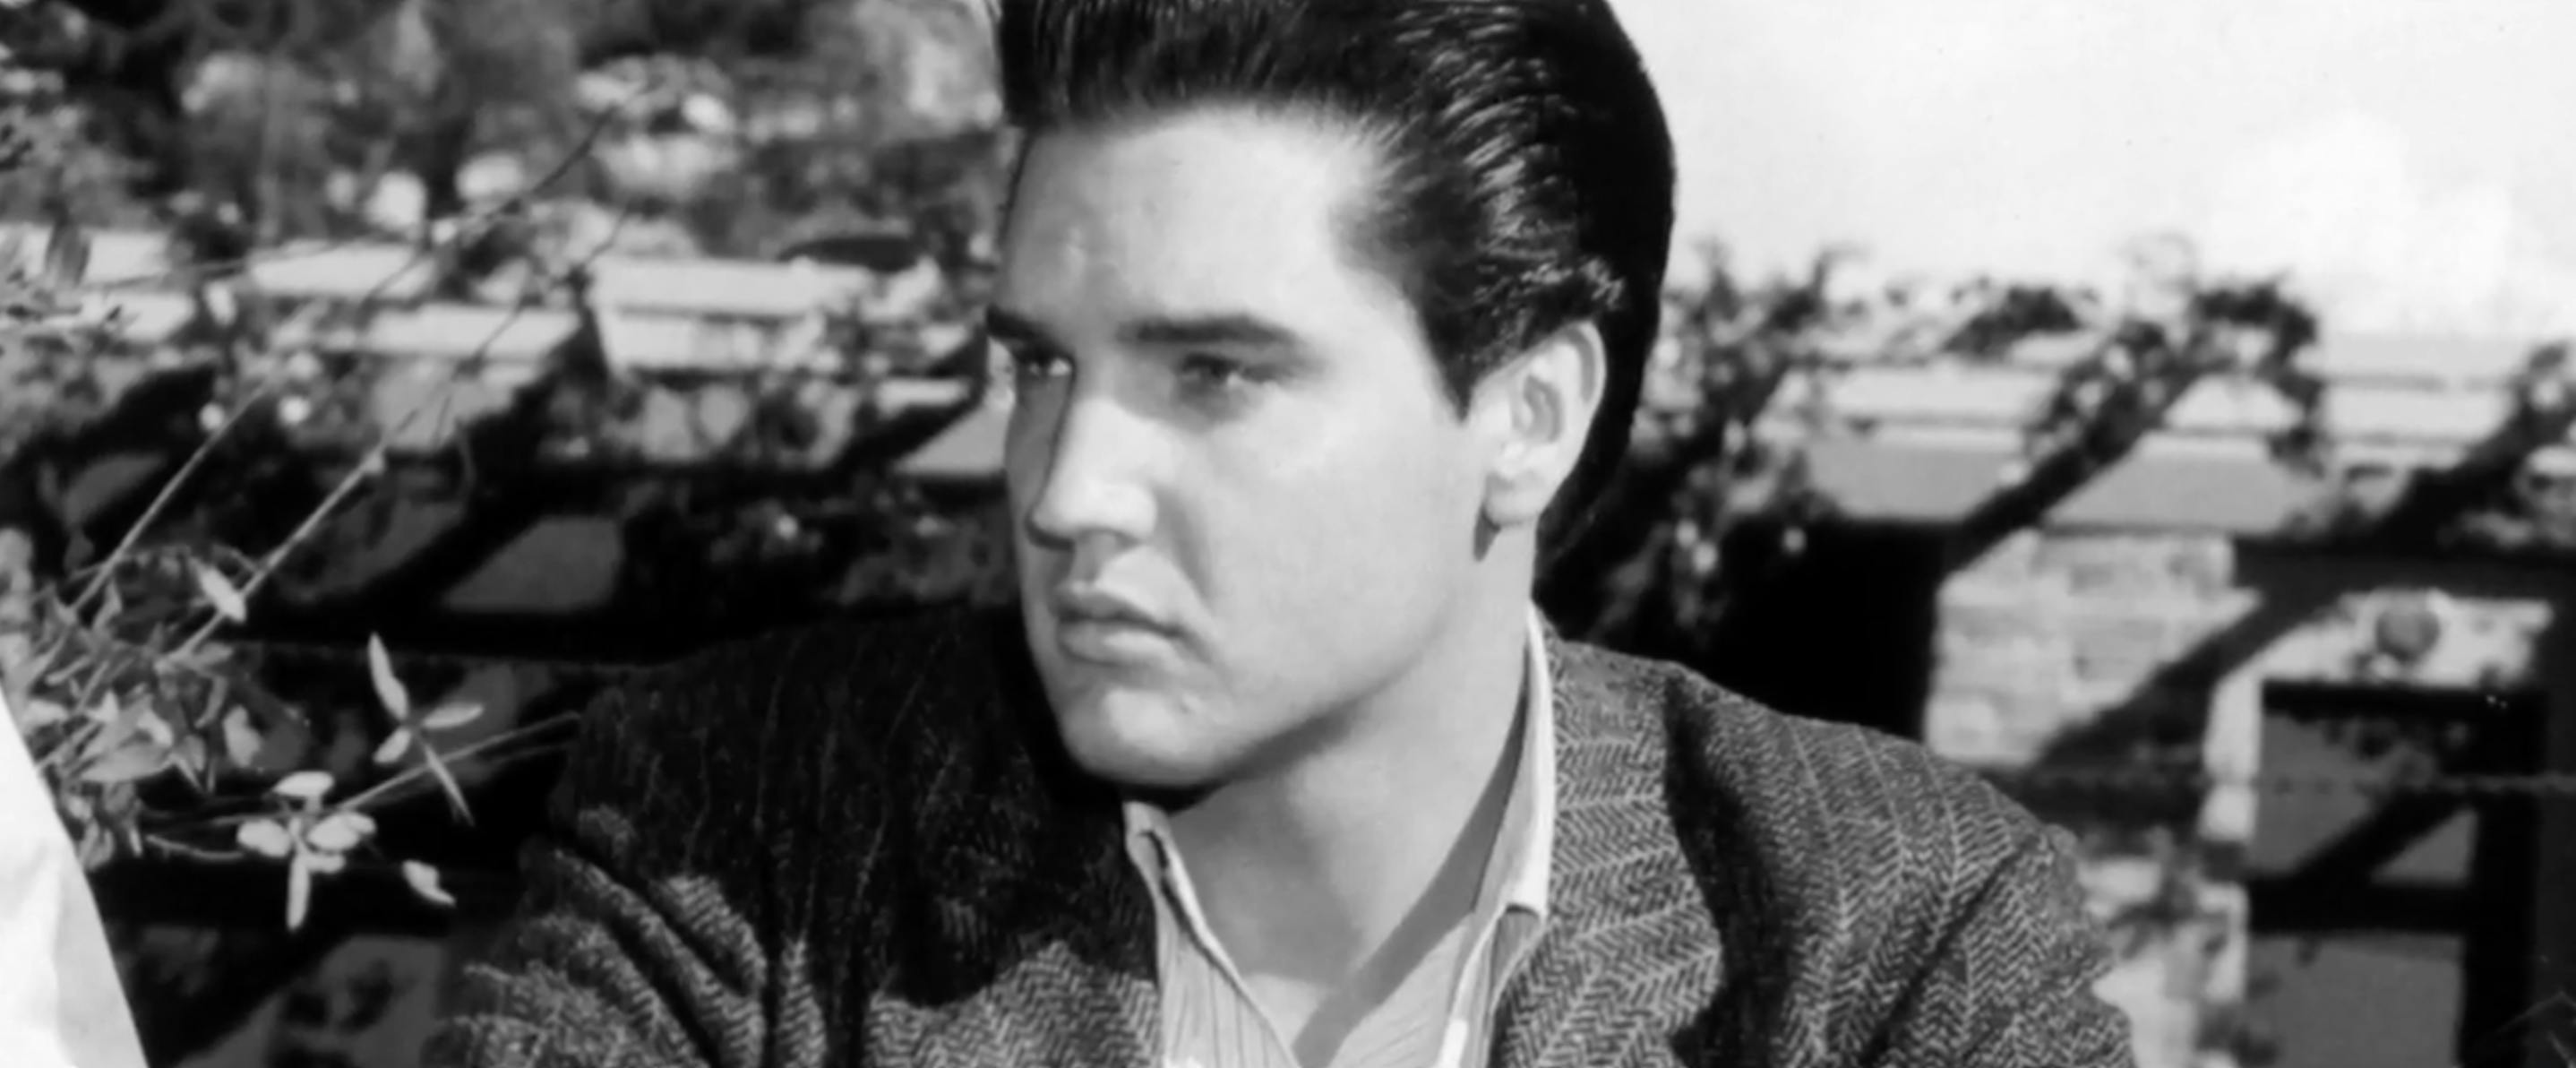 Review: Elvis Presley: The Searcher